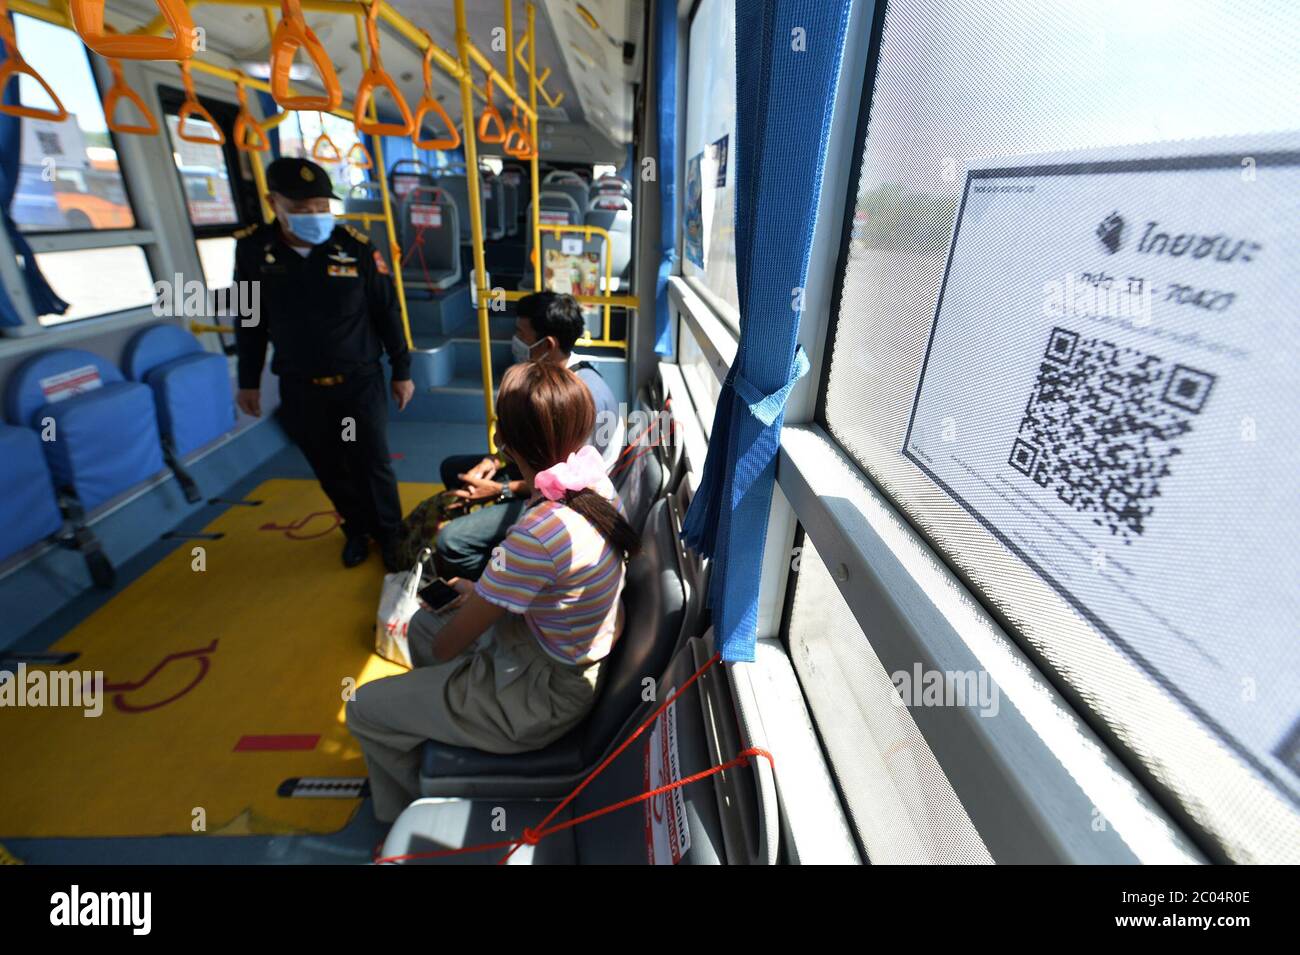 (200611) -- BANGKOK, June 11, 2020 (Xinhua) -- Passengers take a bus in Bangkok, Thailand, June 11, 2020. Bus passengers in Thailand are required to check-in via a government tracking app every time they travel starting on Thursday. The mobile phone QR scanning system has been used on buses as a measure to prevent a further outbreak of the COVID-19 pandemic. (Xinua/Rachen Sageamsak) Stock Photo